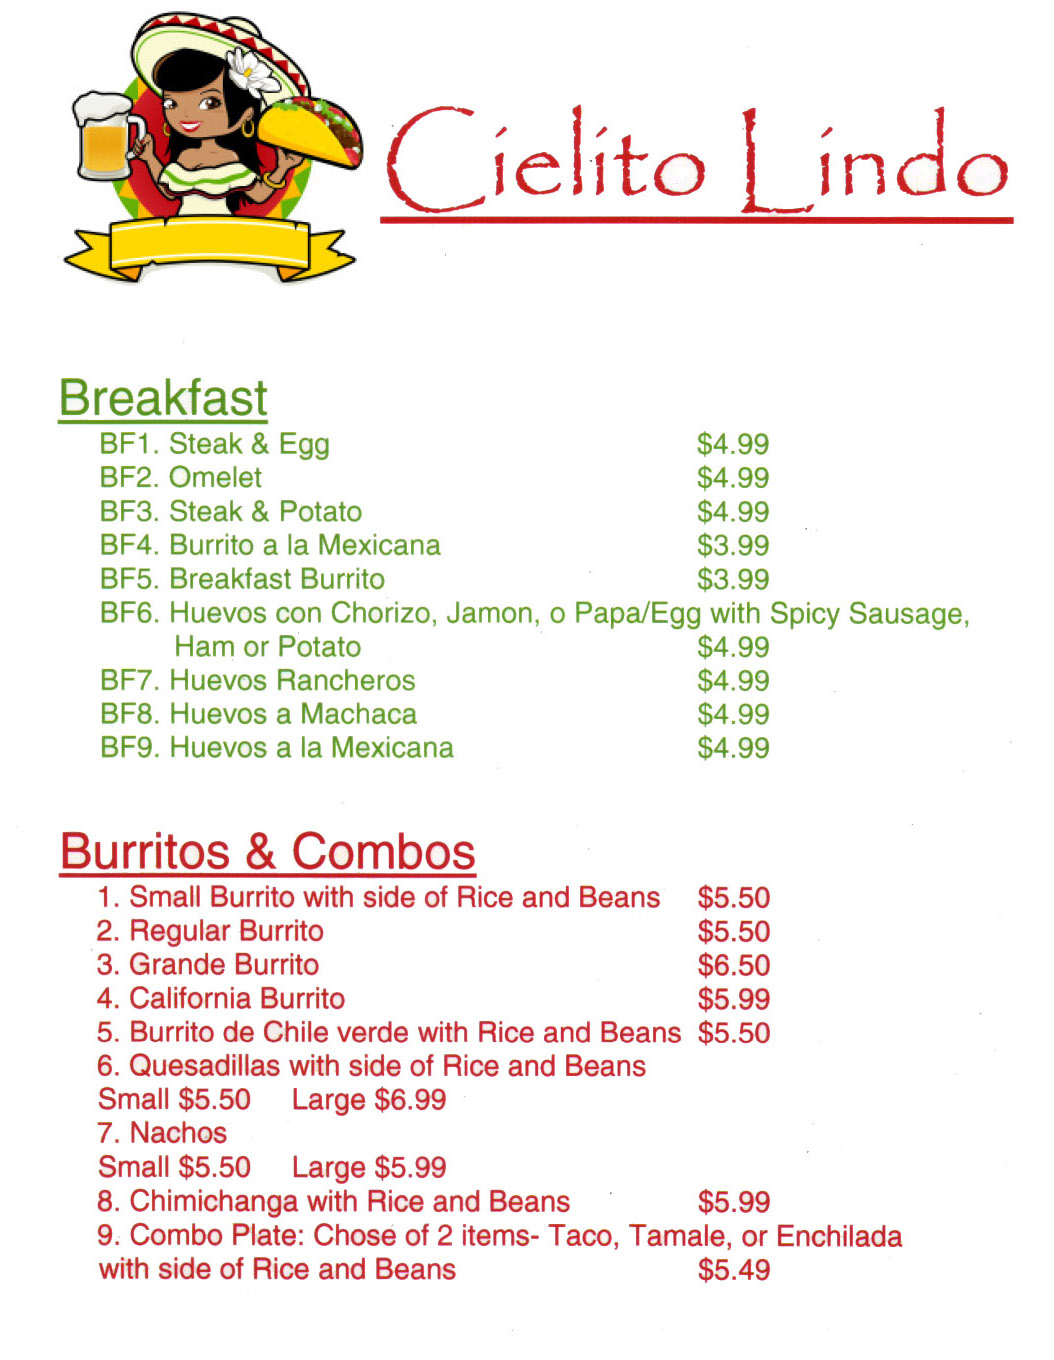 Cielito Lindo Mexican Restaurant Menu Lincoln Ne - Page 1
Cielito Lindo - West O - Menu - 100 N 1st St, Lincoln, NE 68508 - 402-438-4467 - Traditional Authentic Mexican Restaurant - Breakfast - Kids Meals - Burritos - Fajitas Beef - Chicken - Seafood - Pork - Order Online - Metro Dining Delivery

Breakfast 
BF1. Steak & Egg $4.99 
BF2. Omelet $4.99 
BF3. Steak & Potato $4.99 
BF4. Burrito a la Mexicana $3.99 
BF5. Breakfast Burrito $3.99 
BF6. Huevos con Chorizo, Jamon, o Papa/Egg with Spicy Sausage, Ham or Potato $4.99 
BF7. Huevos Rancheros $4.99 
BF8. Huevos a Machaca $4.99 
BF9. Huevos a la Mexicana $4.99 

Burritos & Combos  
1. Small Burrito with side of Rice and Beans $5.50 
2. Regular Burrito $5.50 
3. Grande Burrito $6.50 
4. California Burrito $5.99 
5. Burrito de Chile verde with Rice and Beans $5.50 
6. Quesadillas with side of Rice and Beans Small $5.50 Large $6.99 
7. Nachos Small $5.50 Large $5.99 
8. Chimichanga with Rice and Beans $5.99 
9. Combo Plate: Chose of 2 items- Taco, Tamale, or Enchilada with side of Rice and Beans $5.49 
